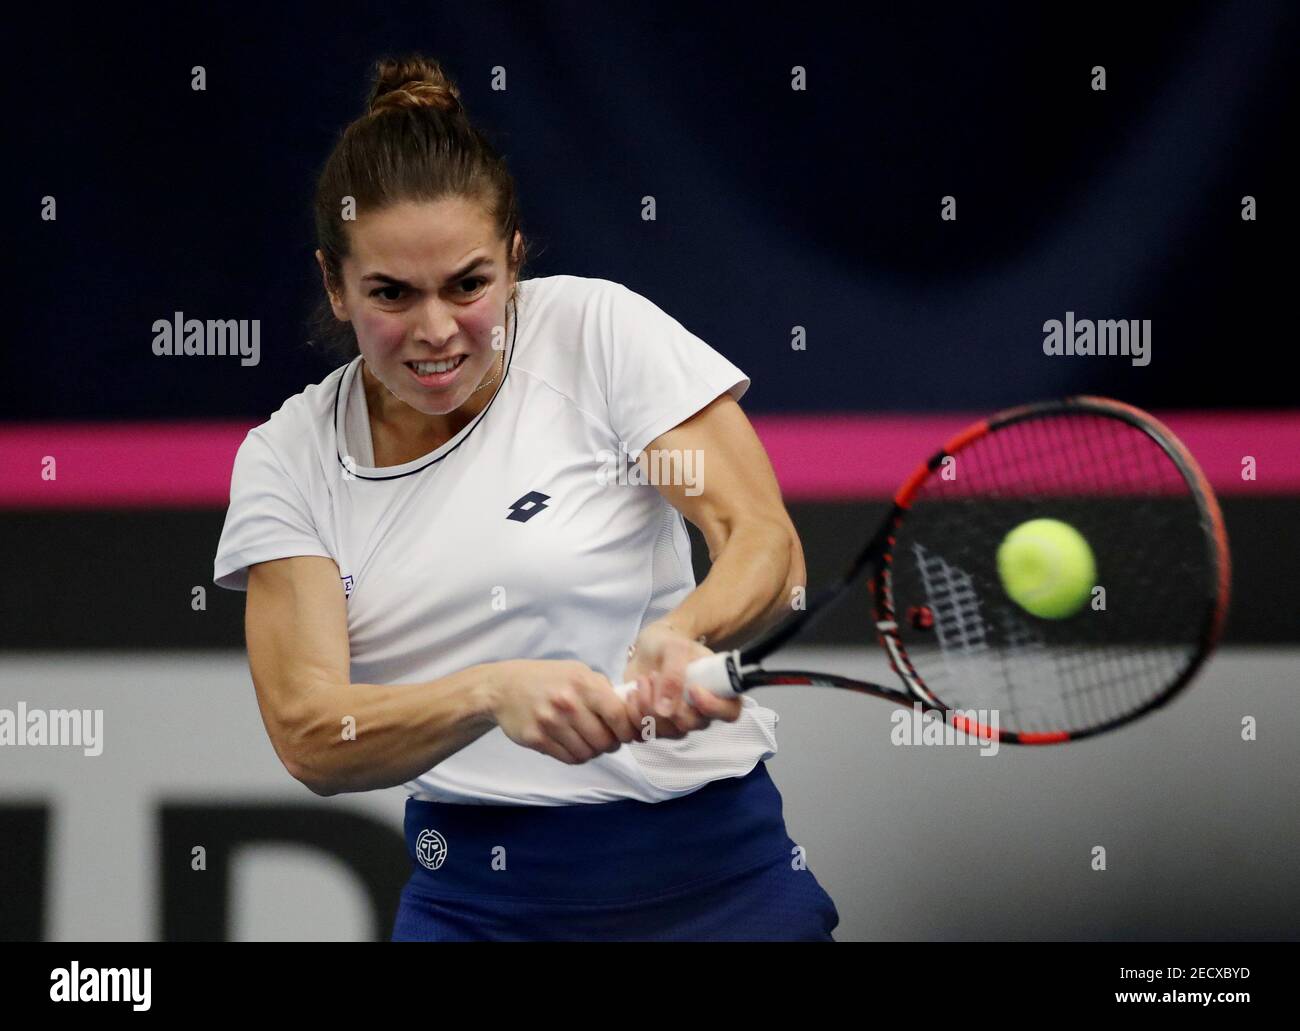 Tennis - Fed Cup - Europe/Africa Group I - Pool A - Great Britain v Greece  - University of Bath, Bath, Britain - February 7, 2019 Greece's Valentini  Grammatikopoulou in action during